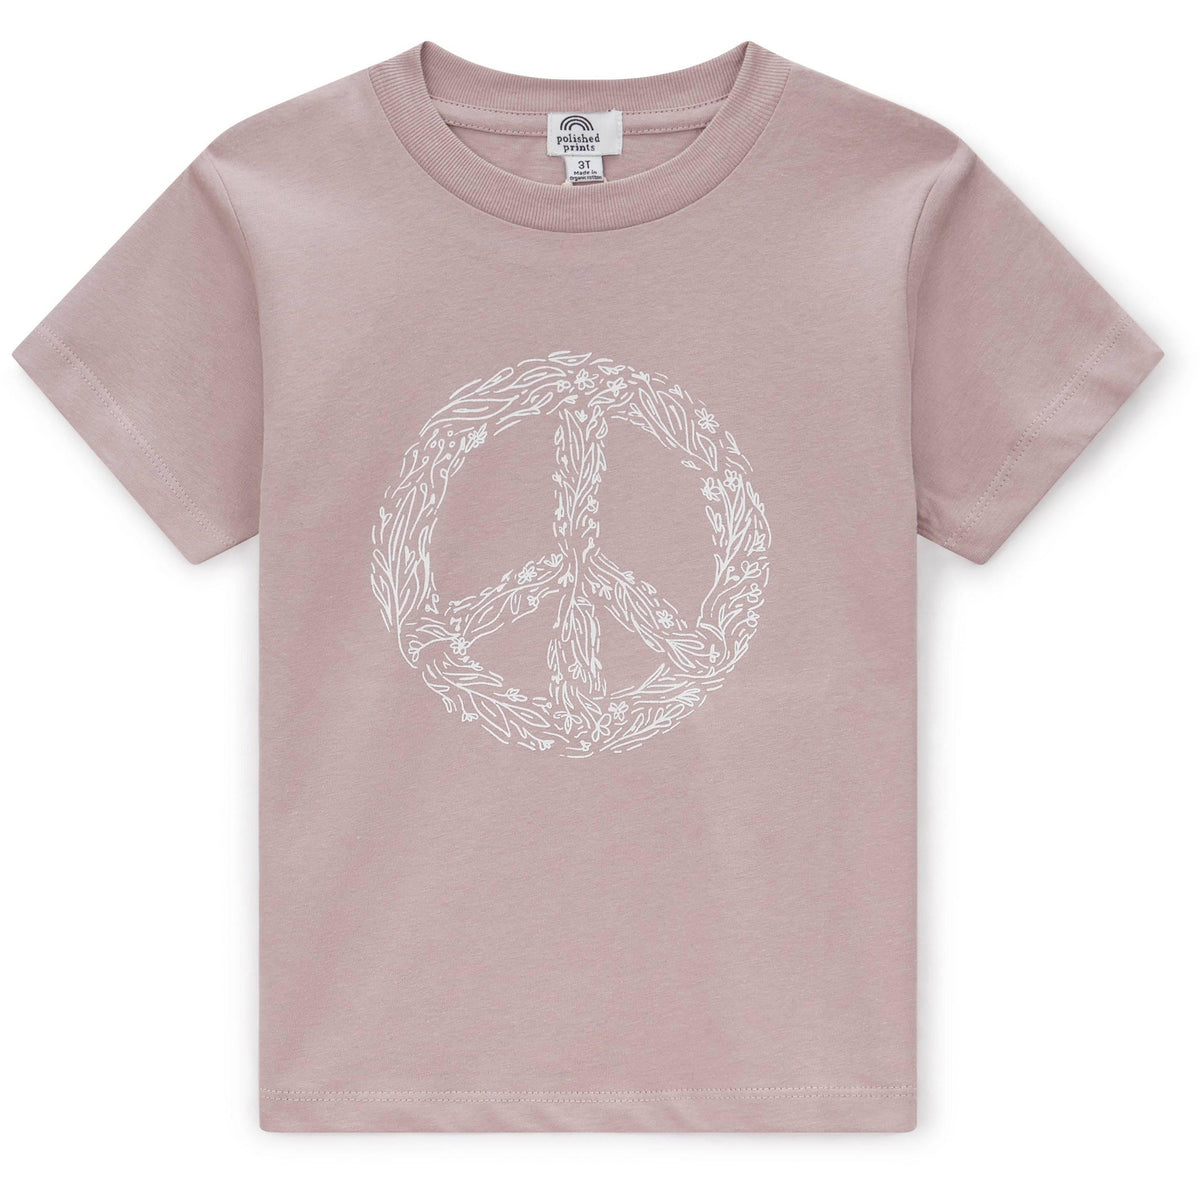 Polished Prints • Girls Peace Floral T-Shirt - All Things Dylan